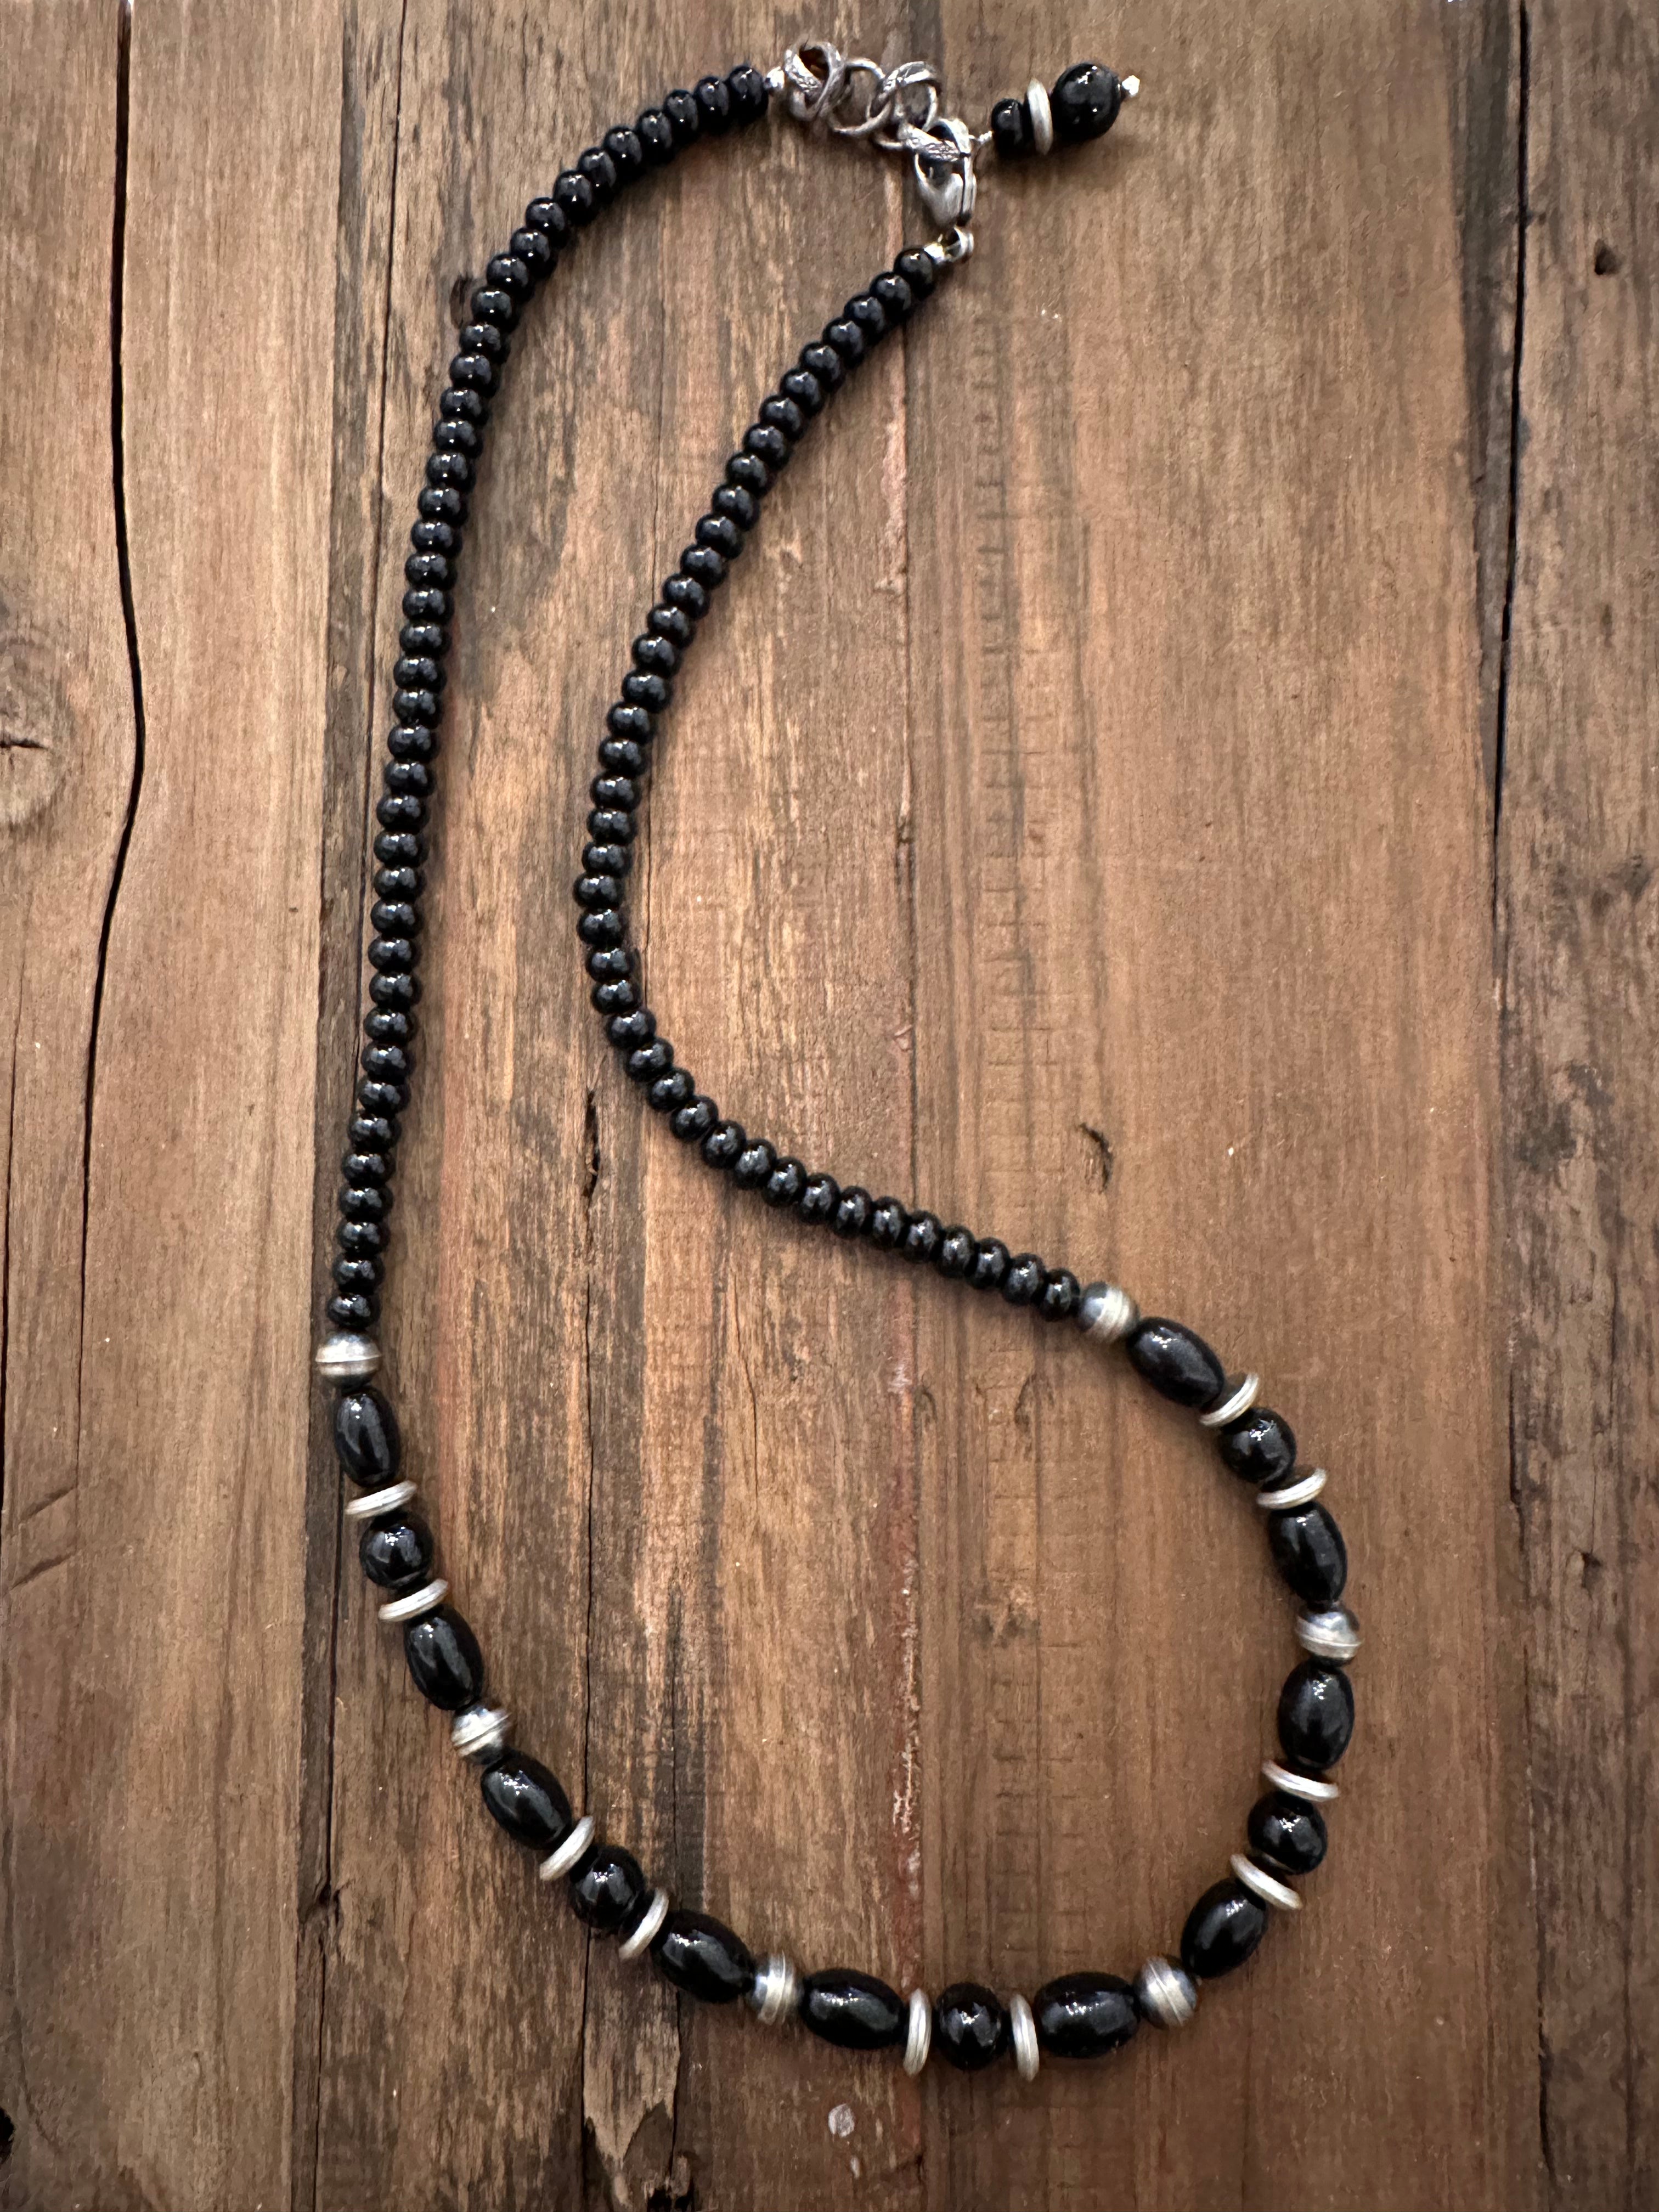 Black Onyx + Cowgirl Pearl Necklace